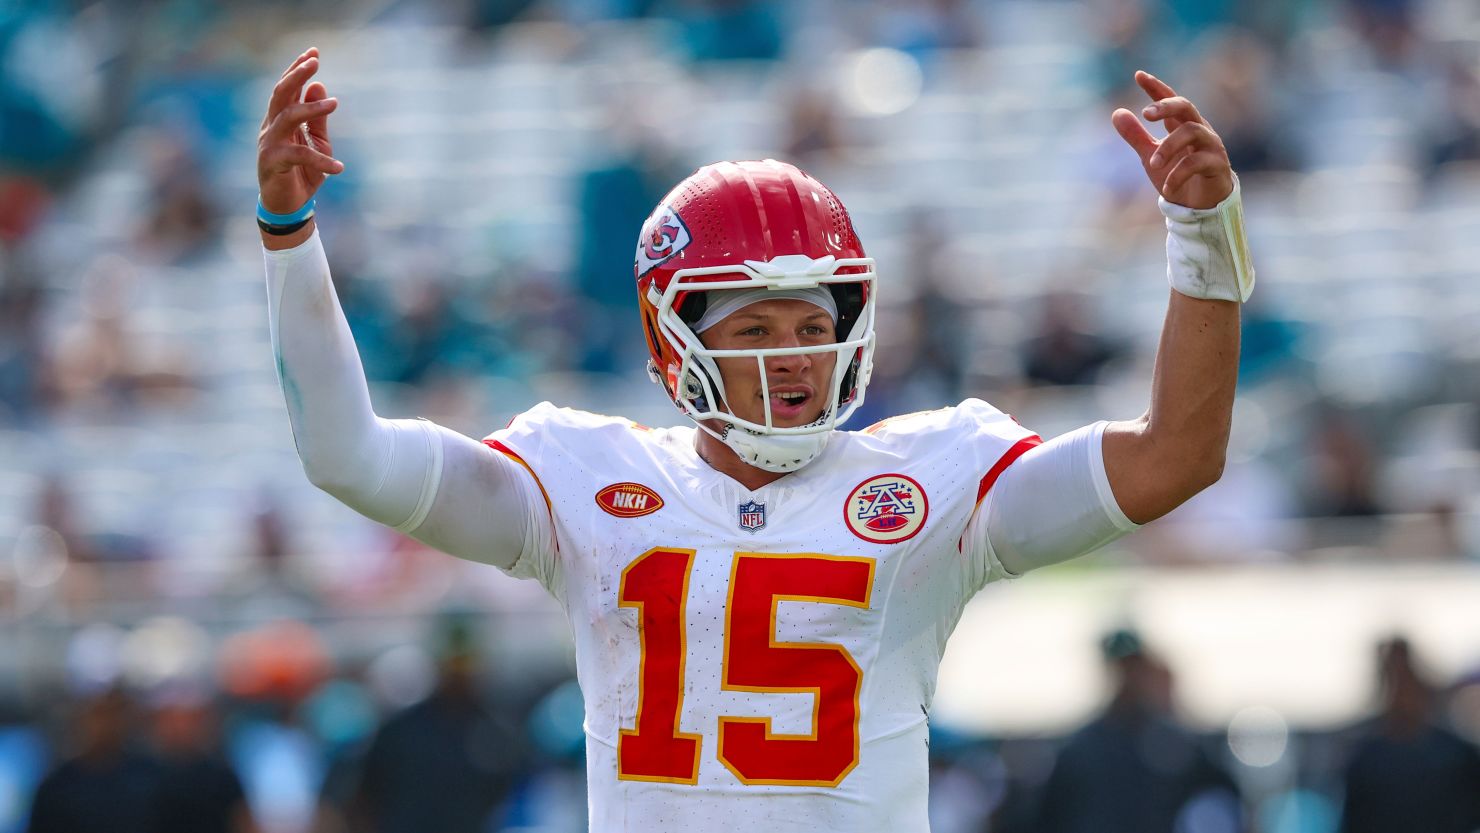 Patrick Mahomes set NFL record in Chiefs' win over Jaguars